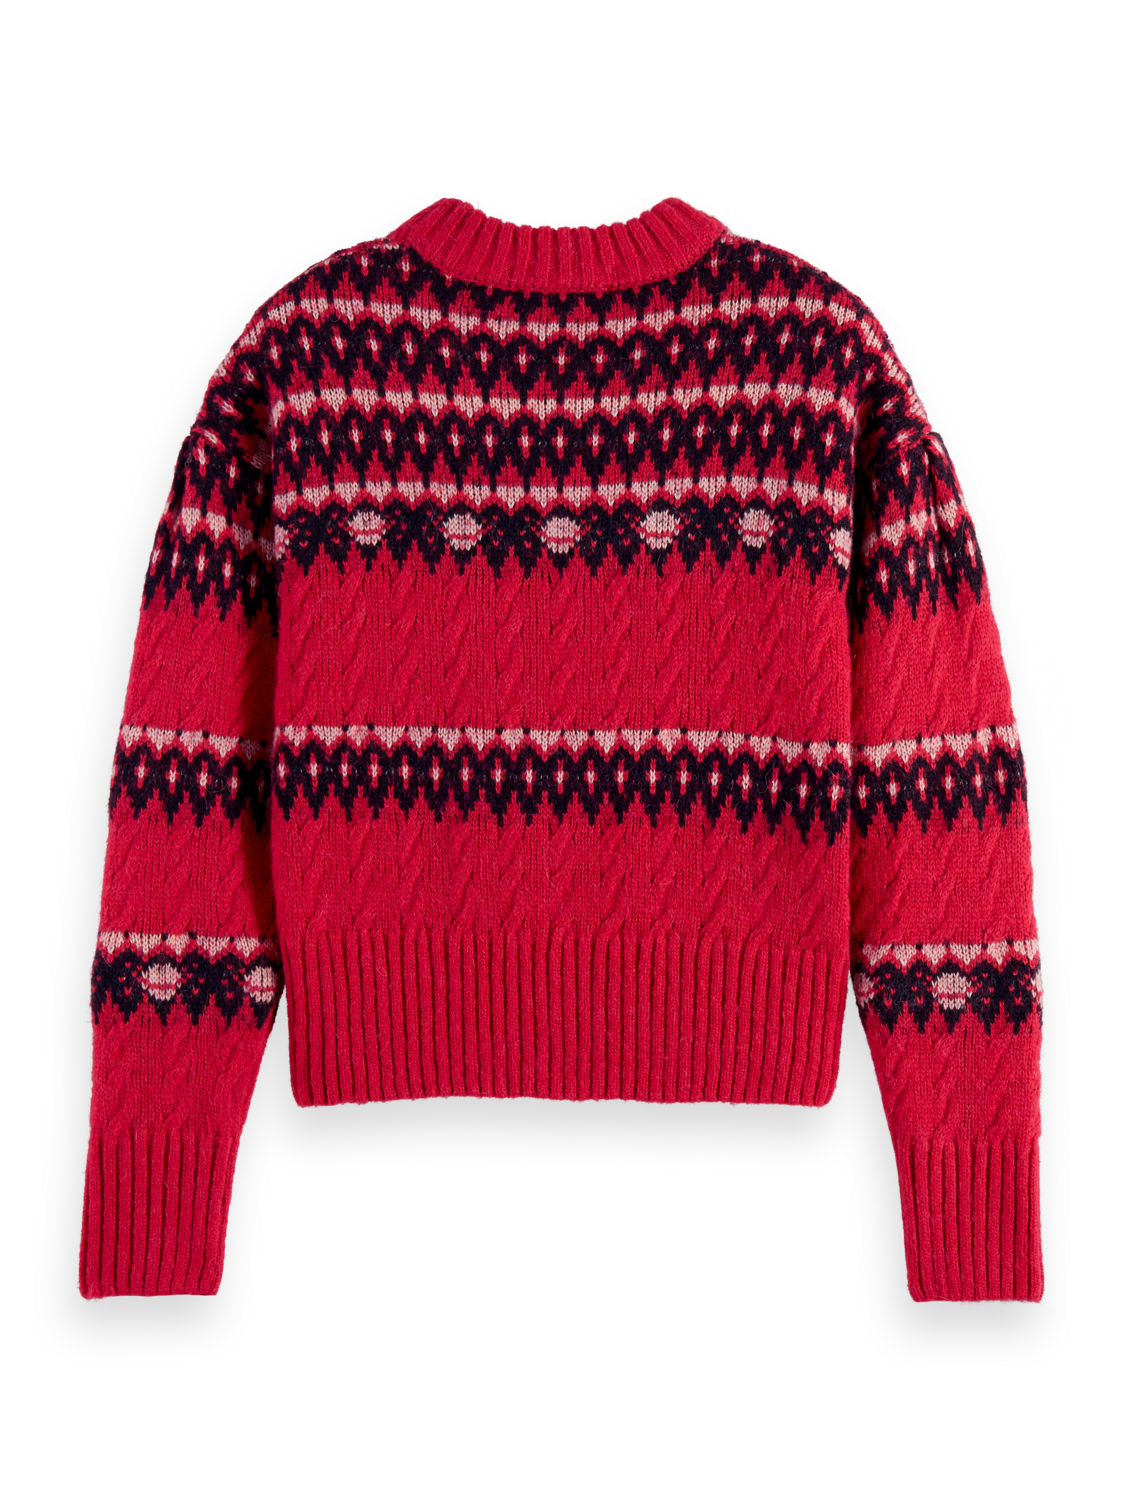 Scotch and Soda FAIR ISLE CABLE KNIT Pullover - Brand-Scotch and Soda ...